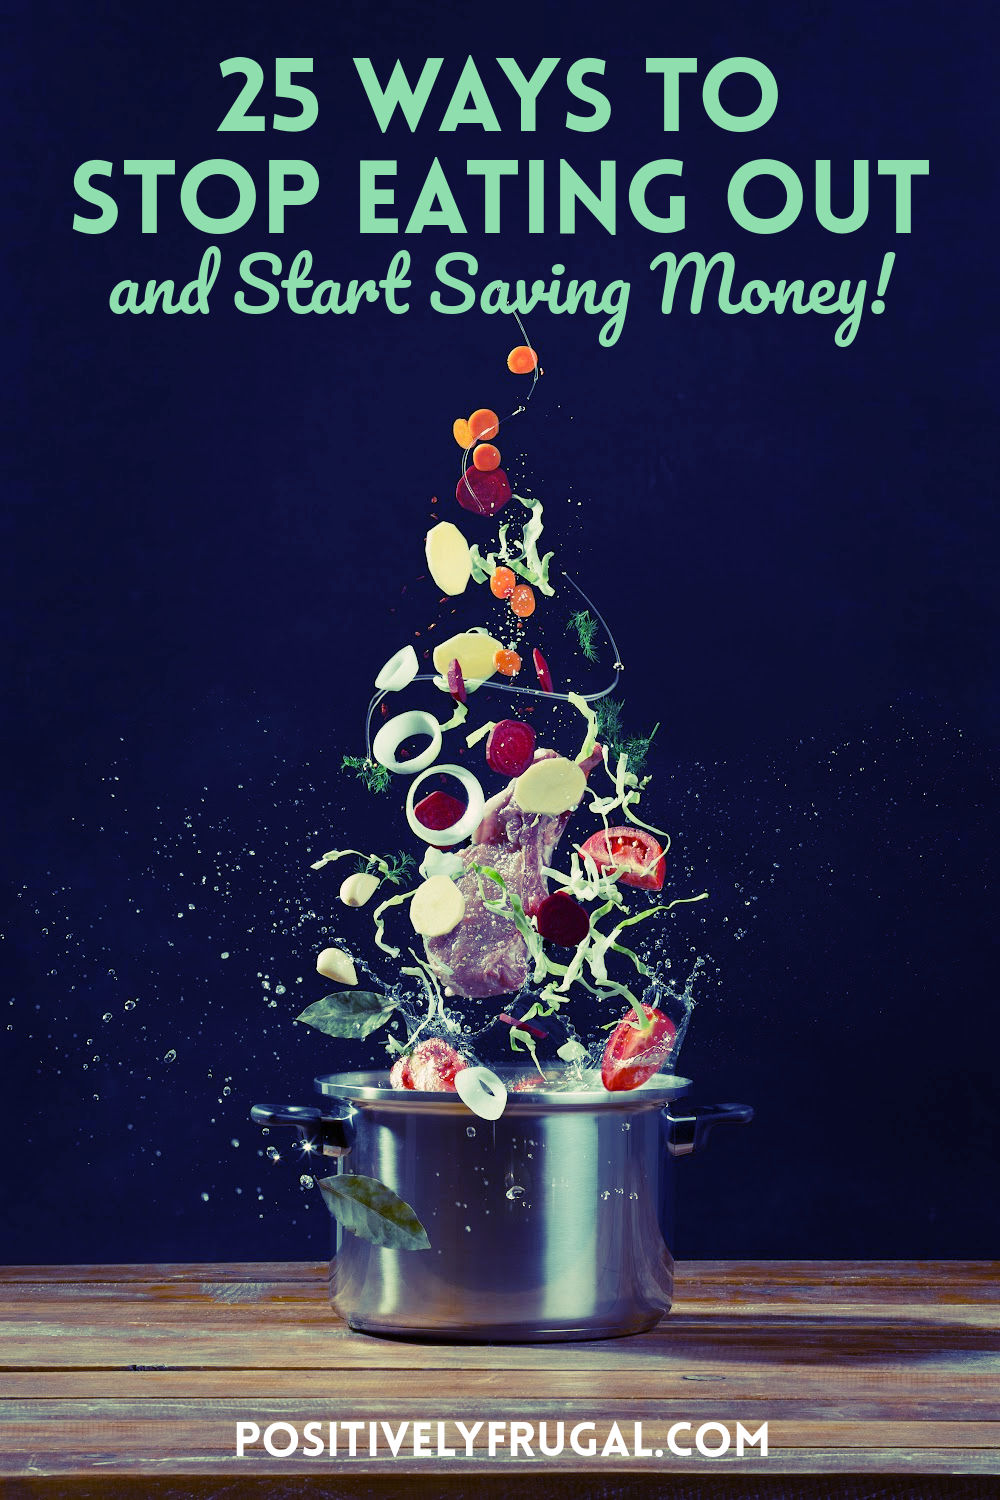 25 Ways to Stop Eating Out and Start Saving Money by PositivelyFrugal.com